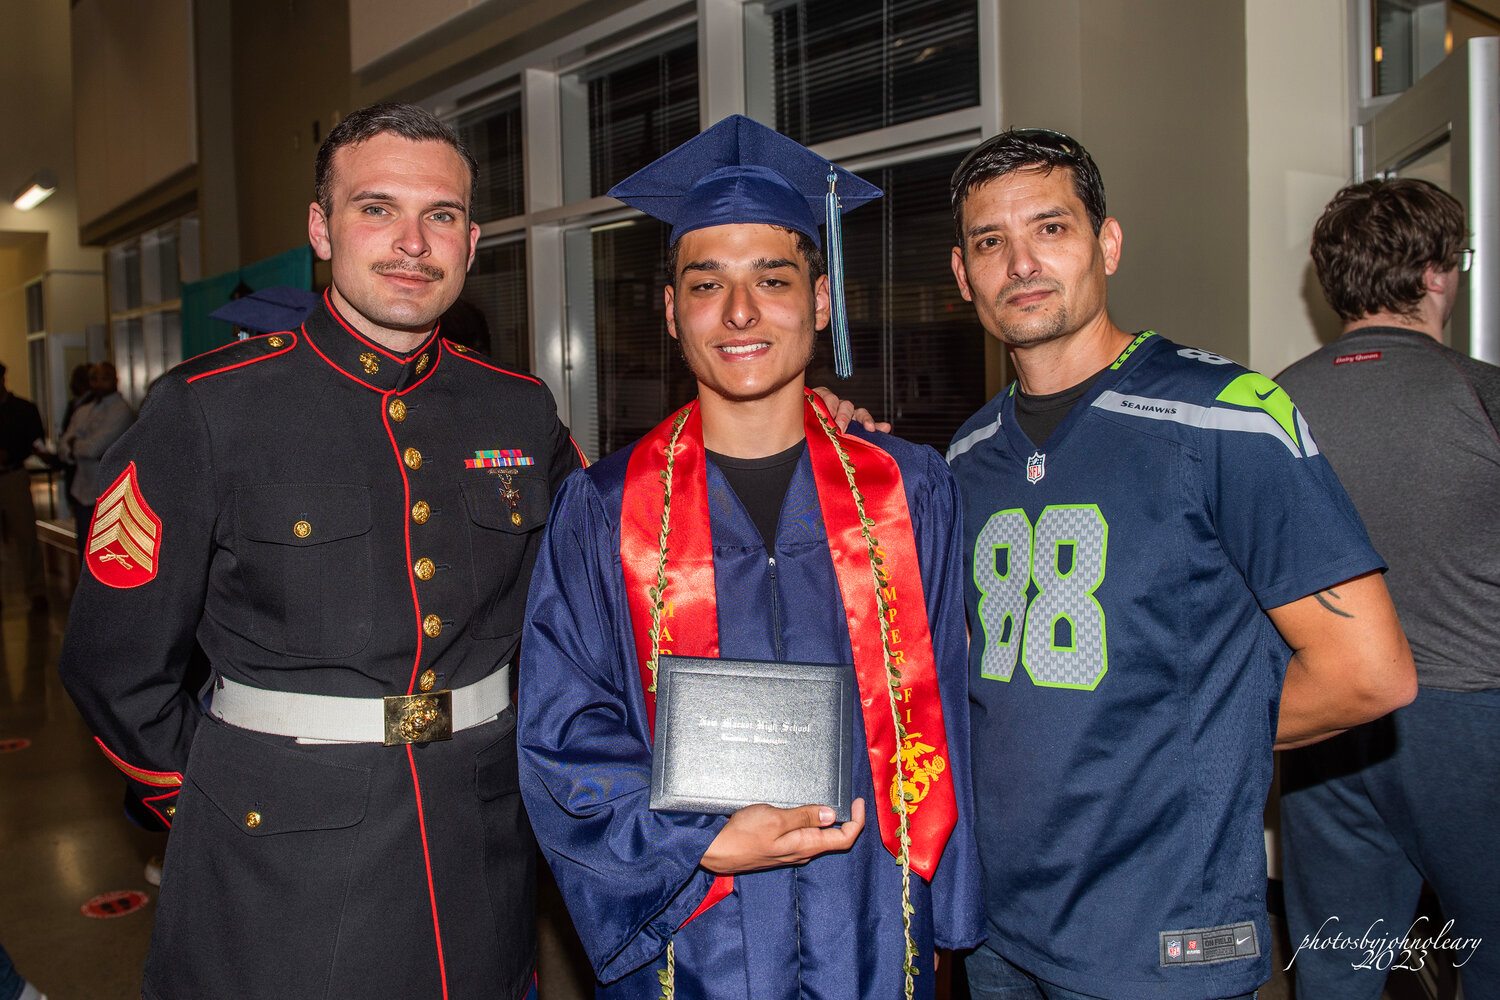 A New Market High School graduate with his family.